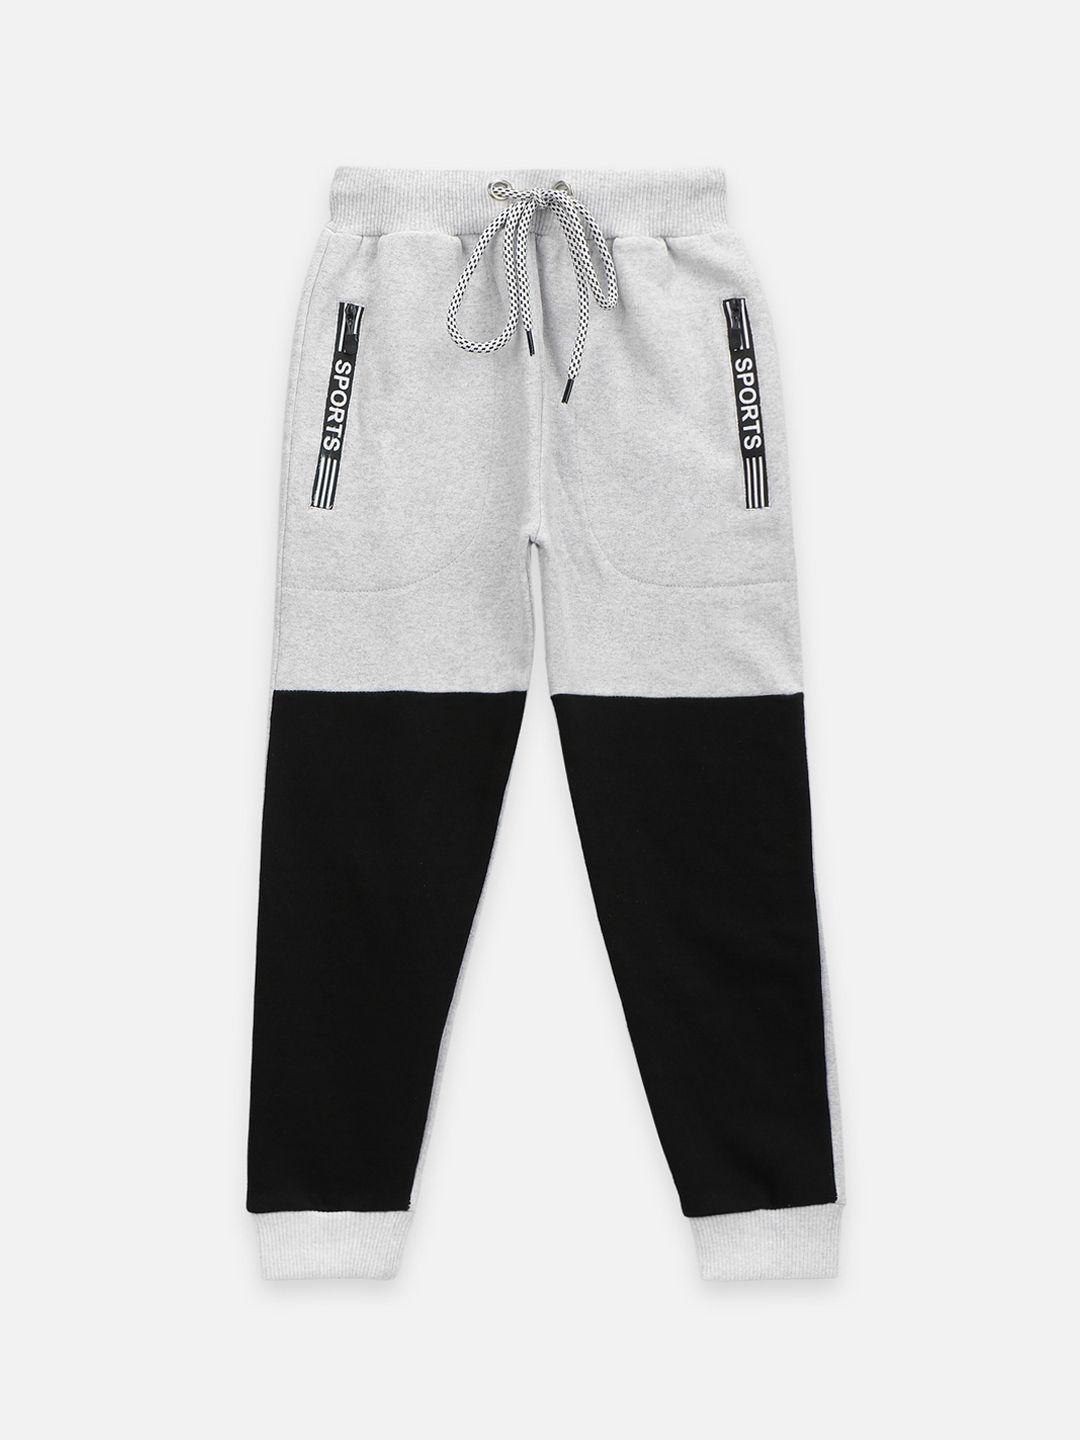 lilpicks boys black & white colorblocked relaxed fit joggers